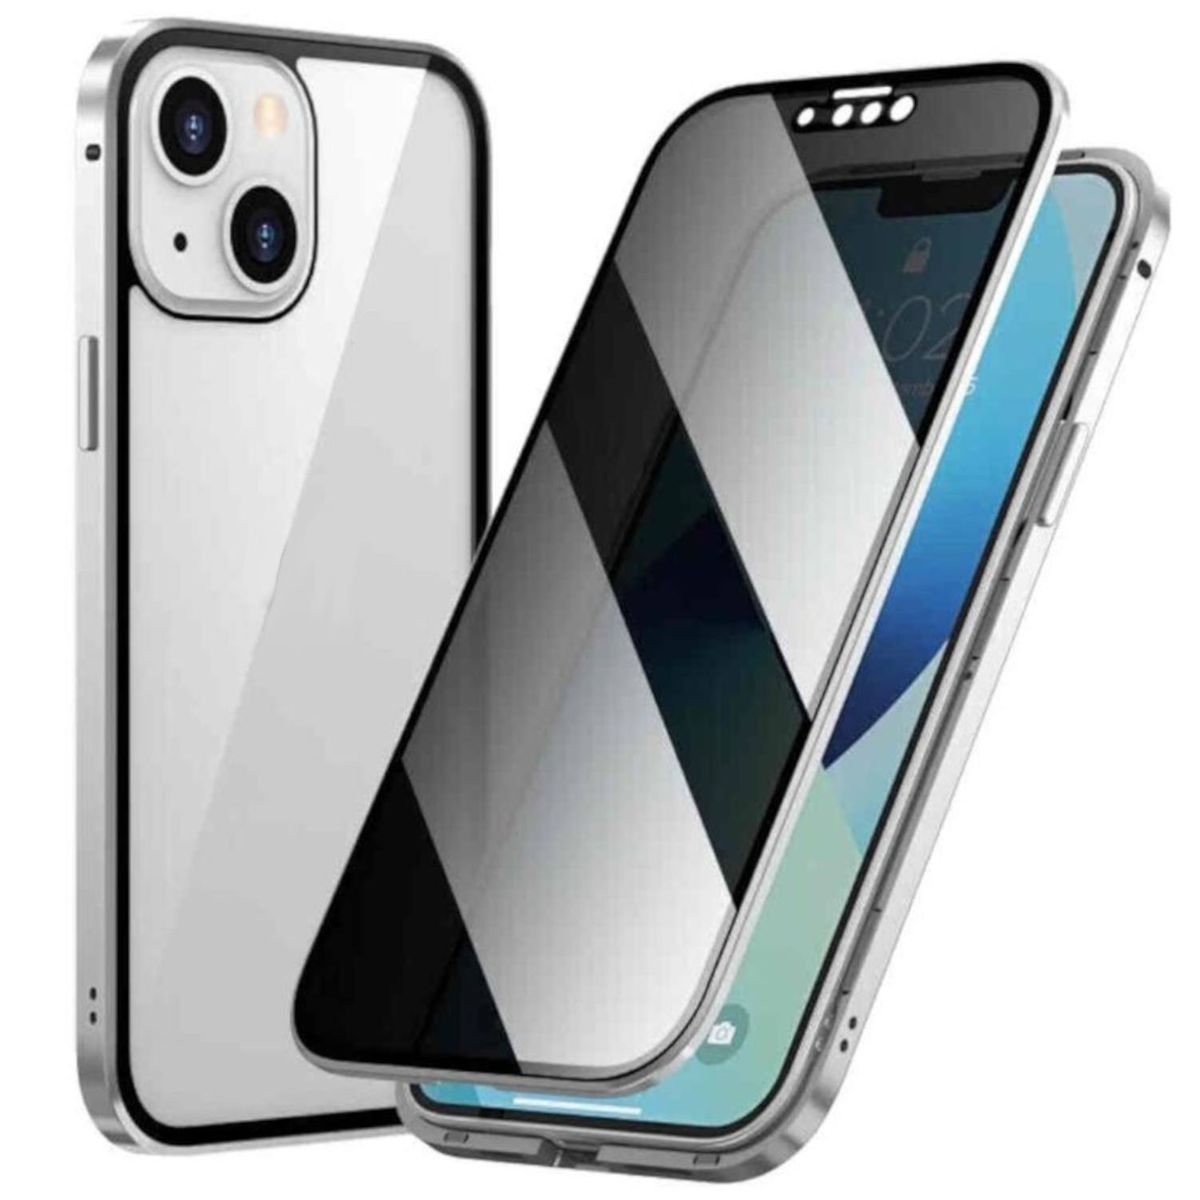 Mirror Transparent Cover, / 15 WIGENTO Pro 360 Silber Hülle, Beidseitiger Privacy Apple, Magnet Glas Grad / iPhone Full Max,